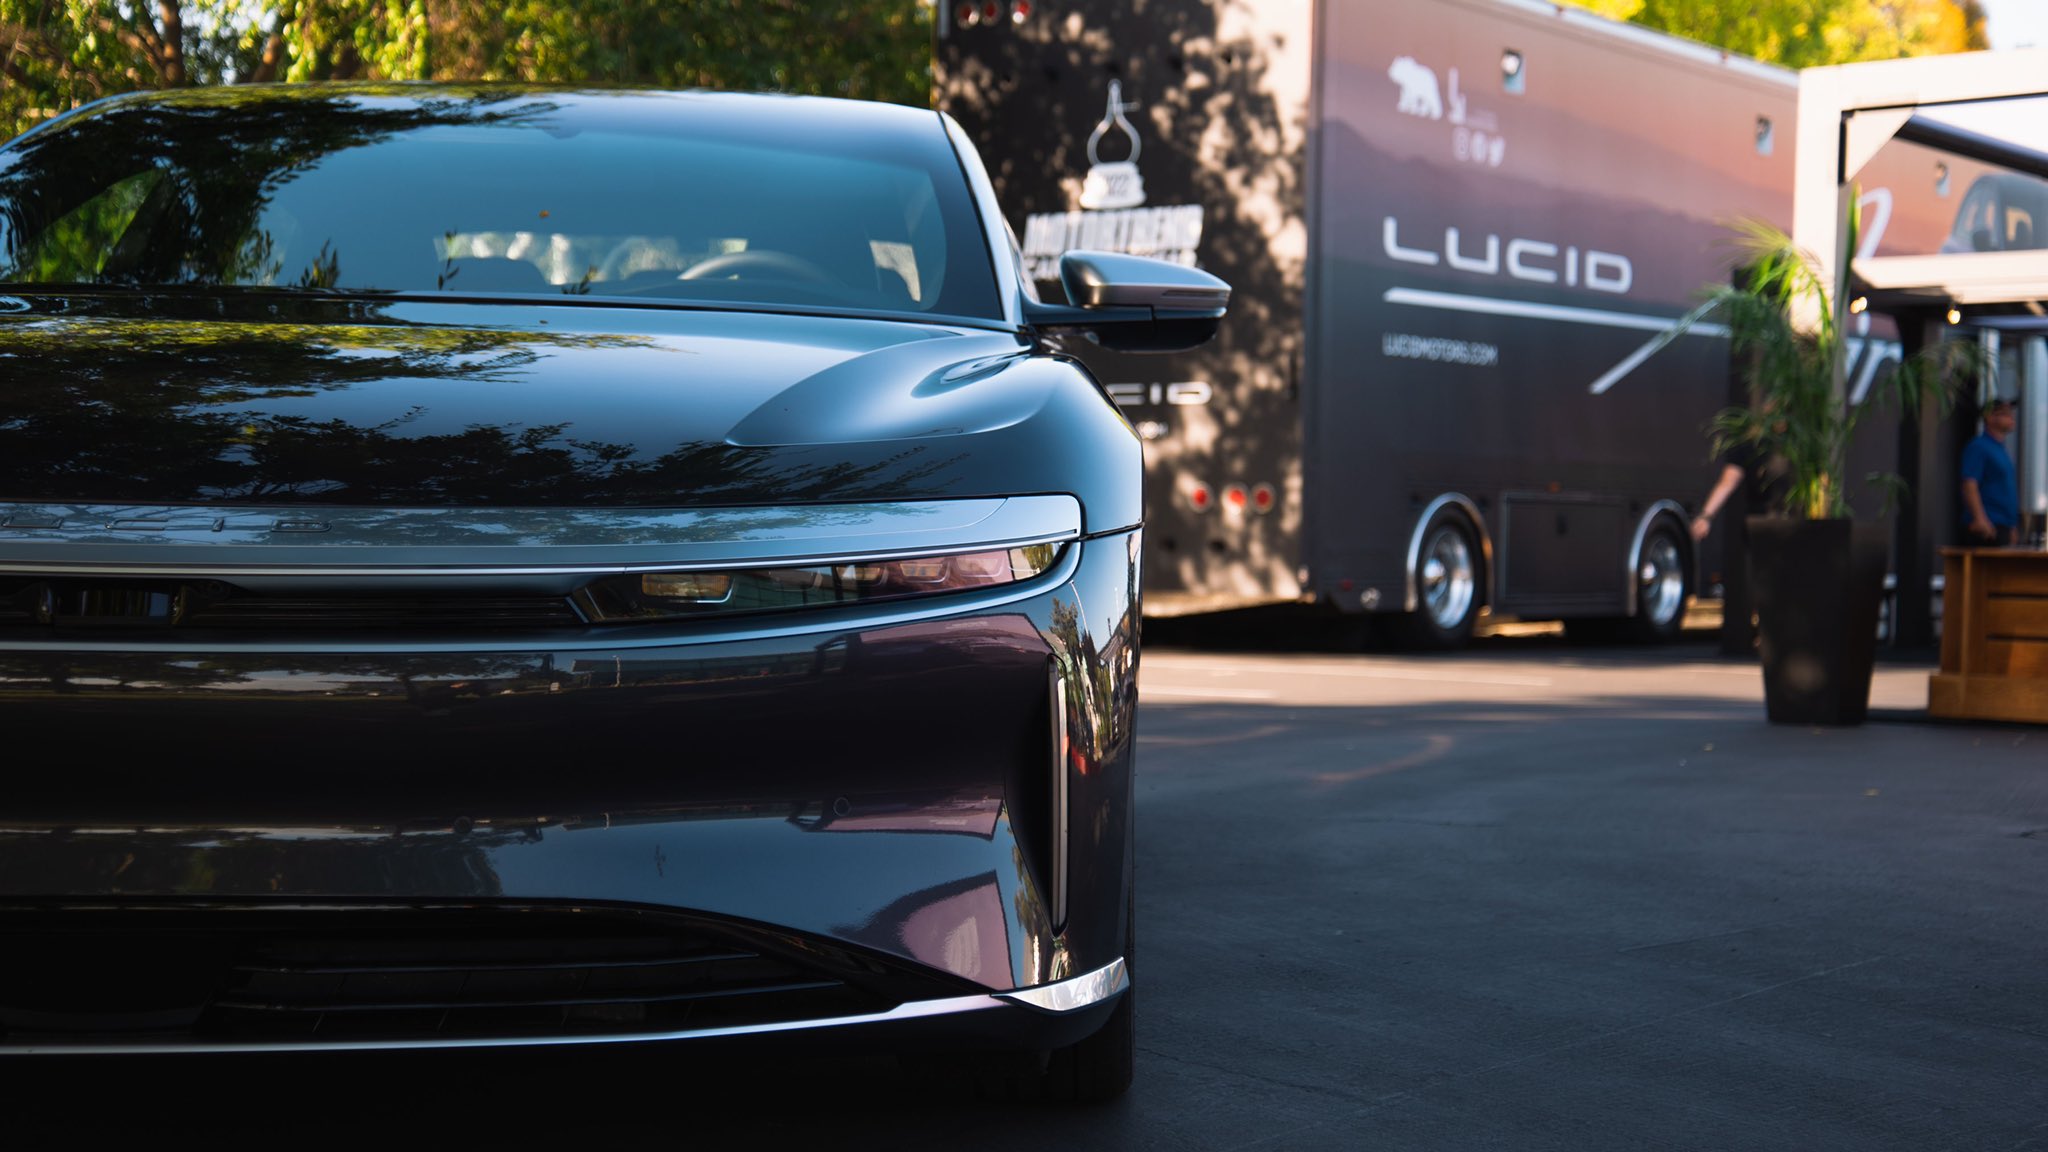 Lucid Motors To Do Cross Country Tour To Meet Reservation Holders & Media